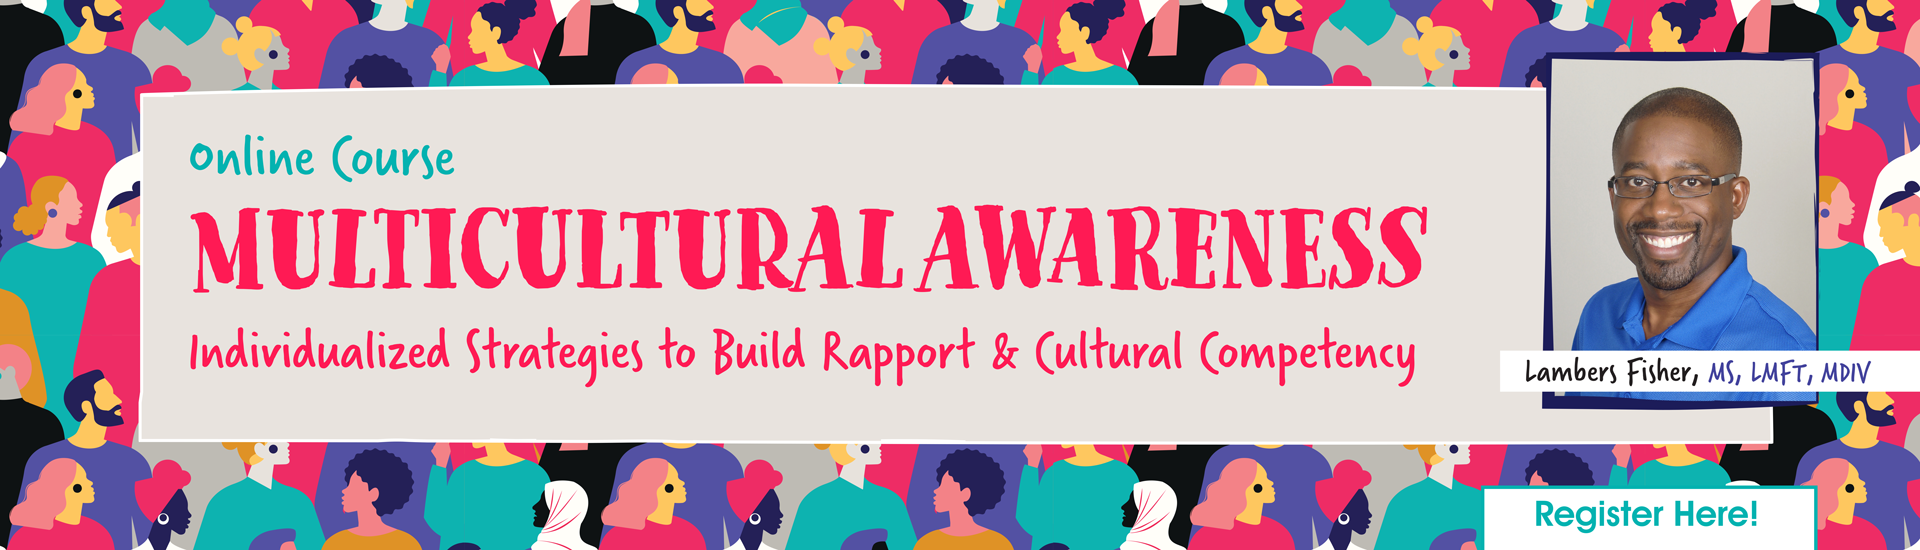 Multicultural Awareness: Individualized Strategies to Build Rapport & Cultural Competency